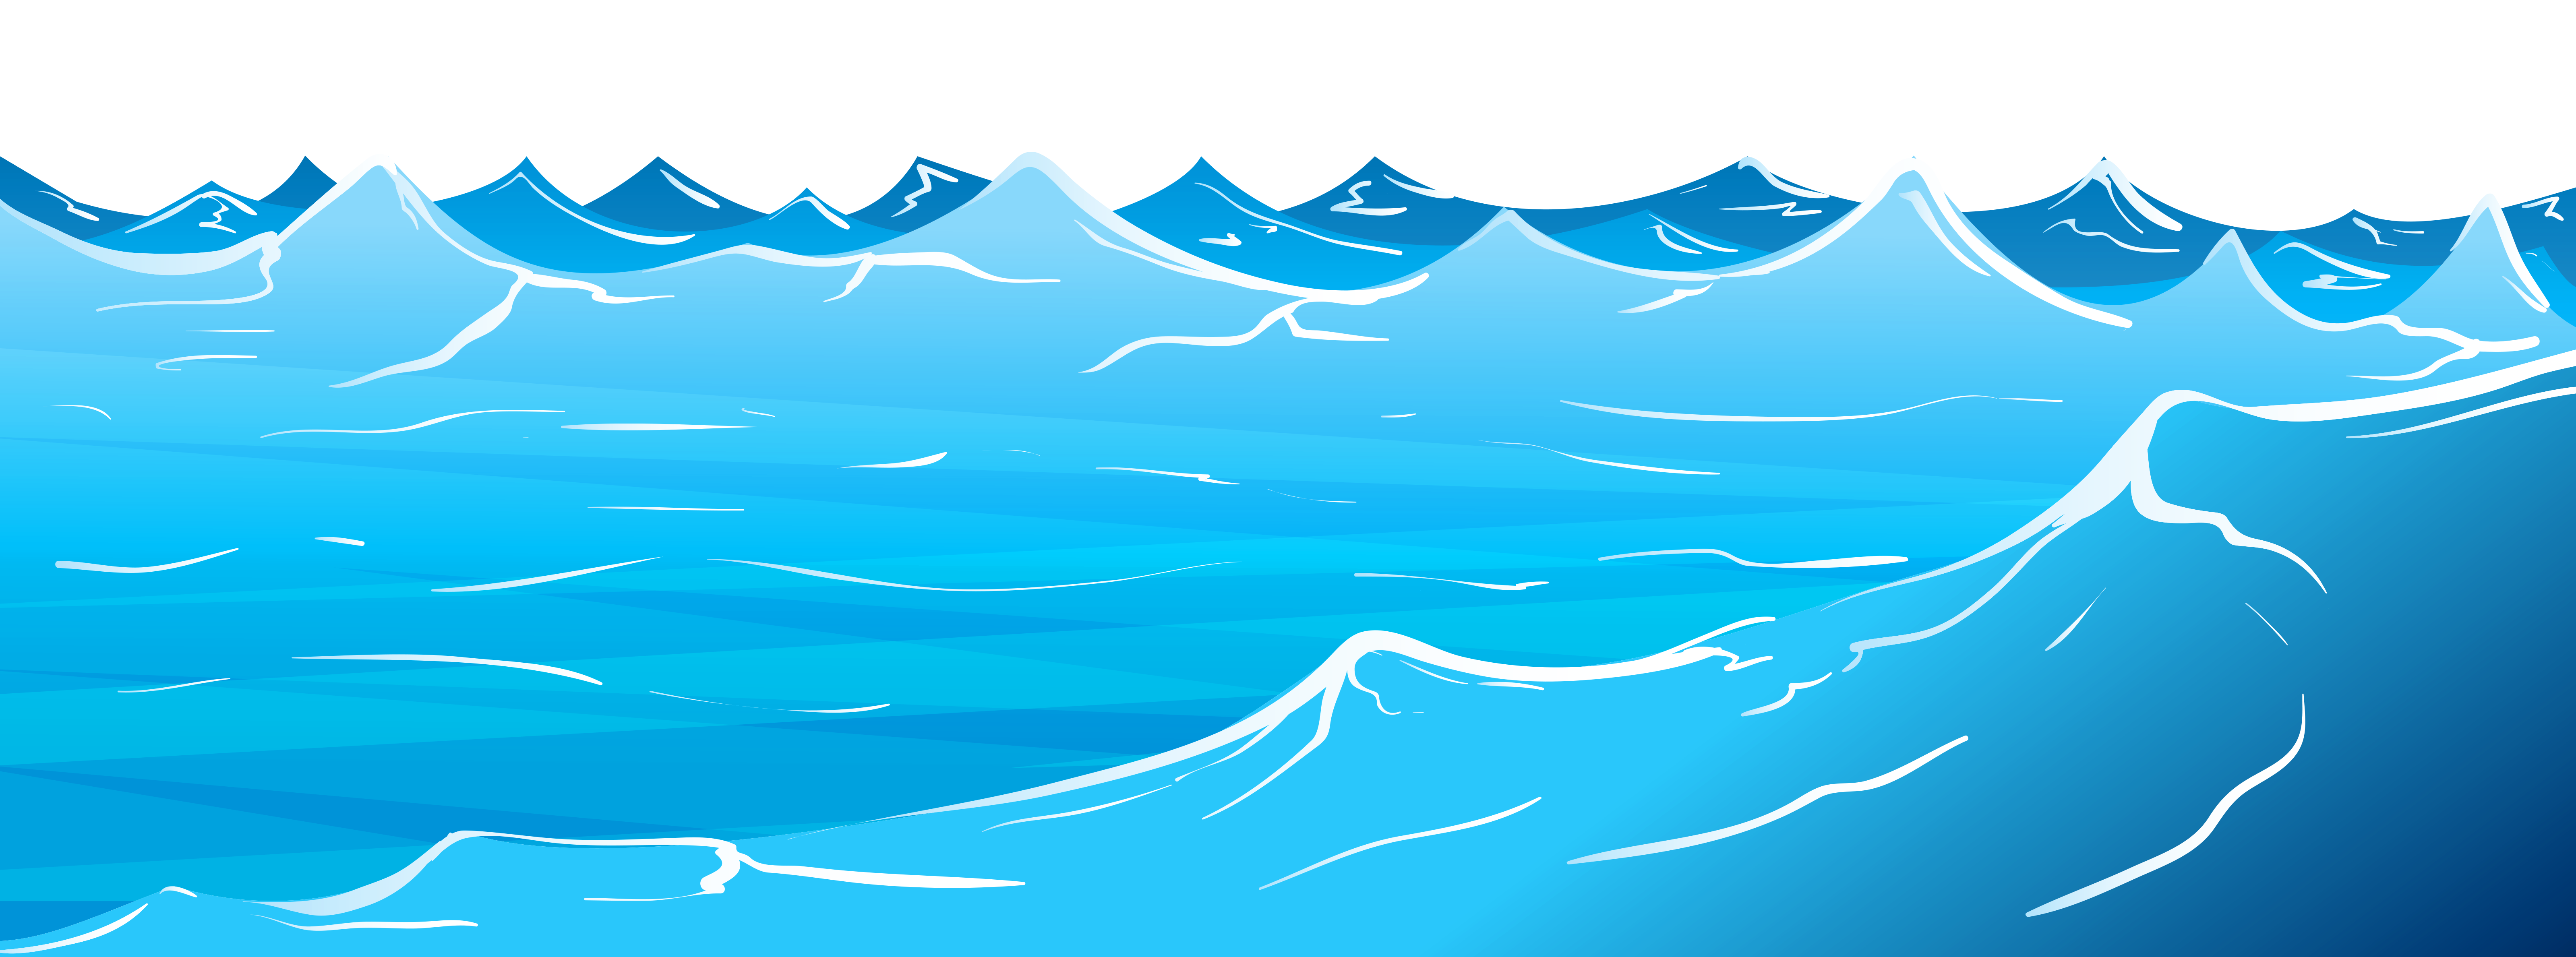 What is in ocean. Geology clipart water erosion